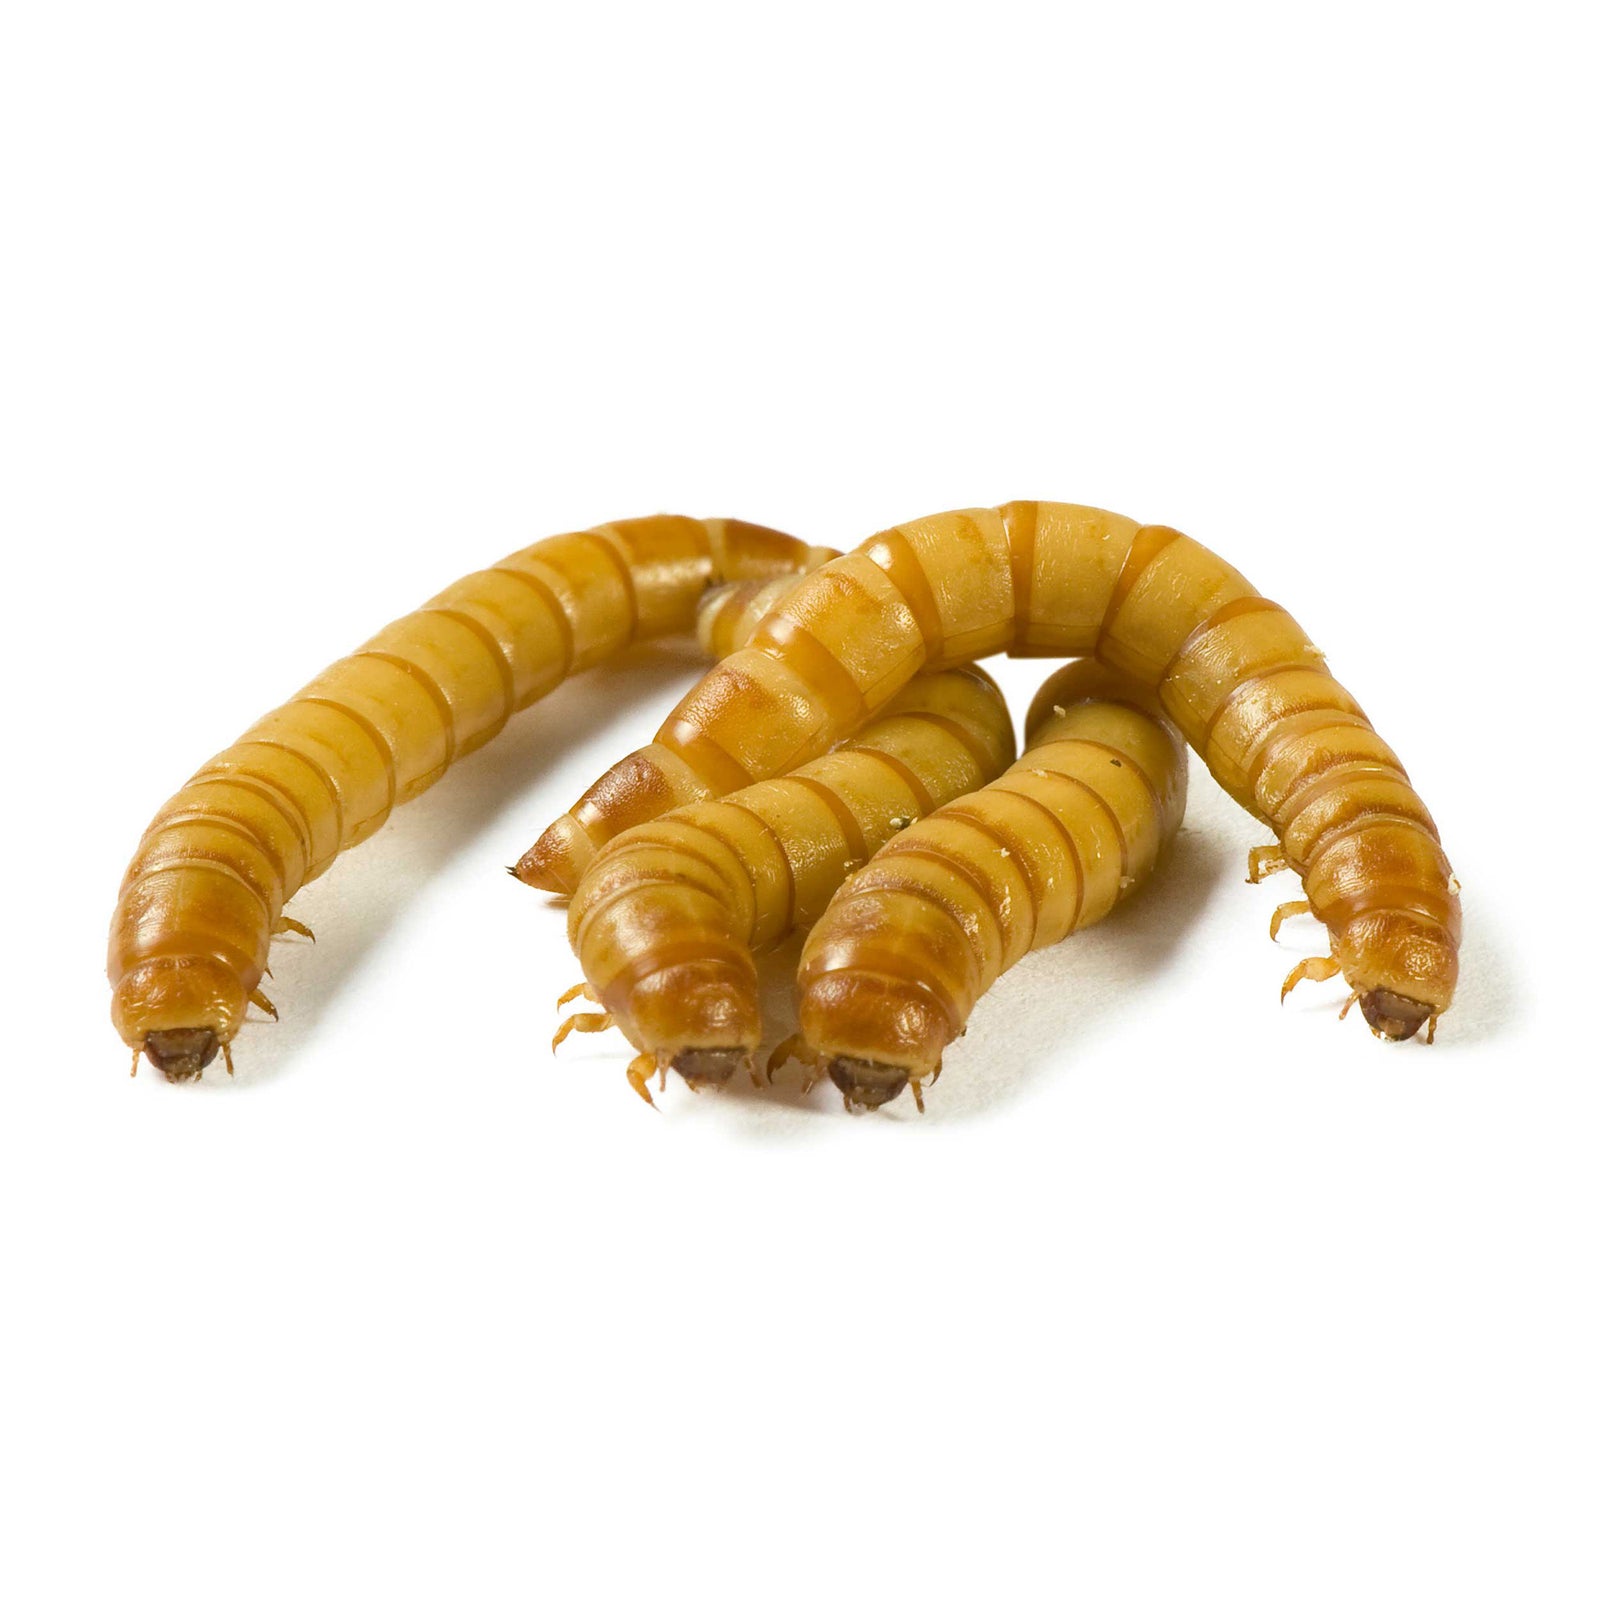 Live Wax Worms 50 Count